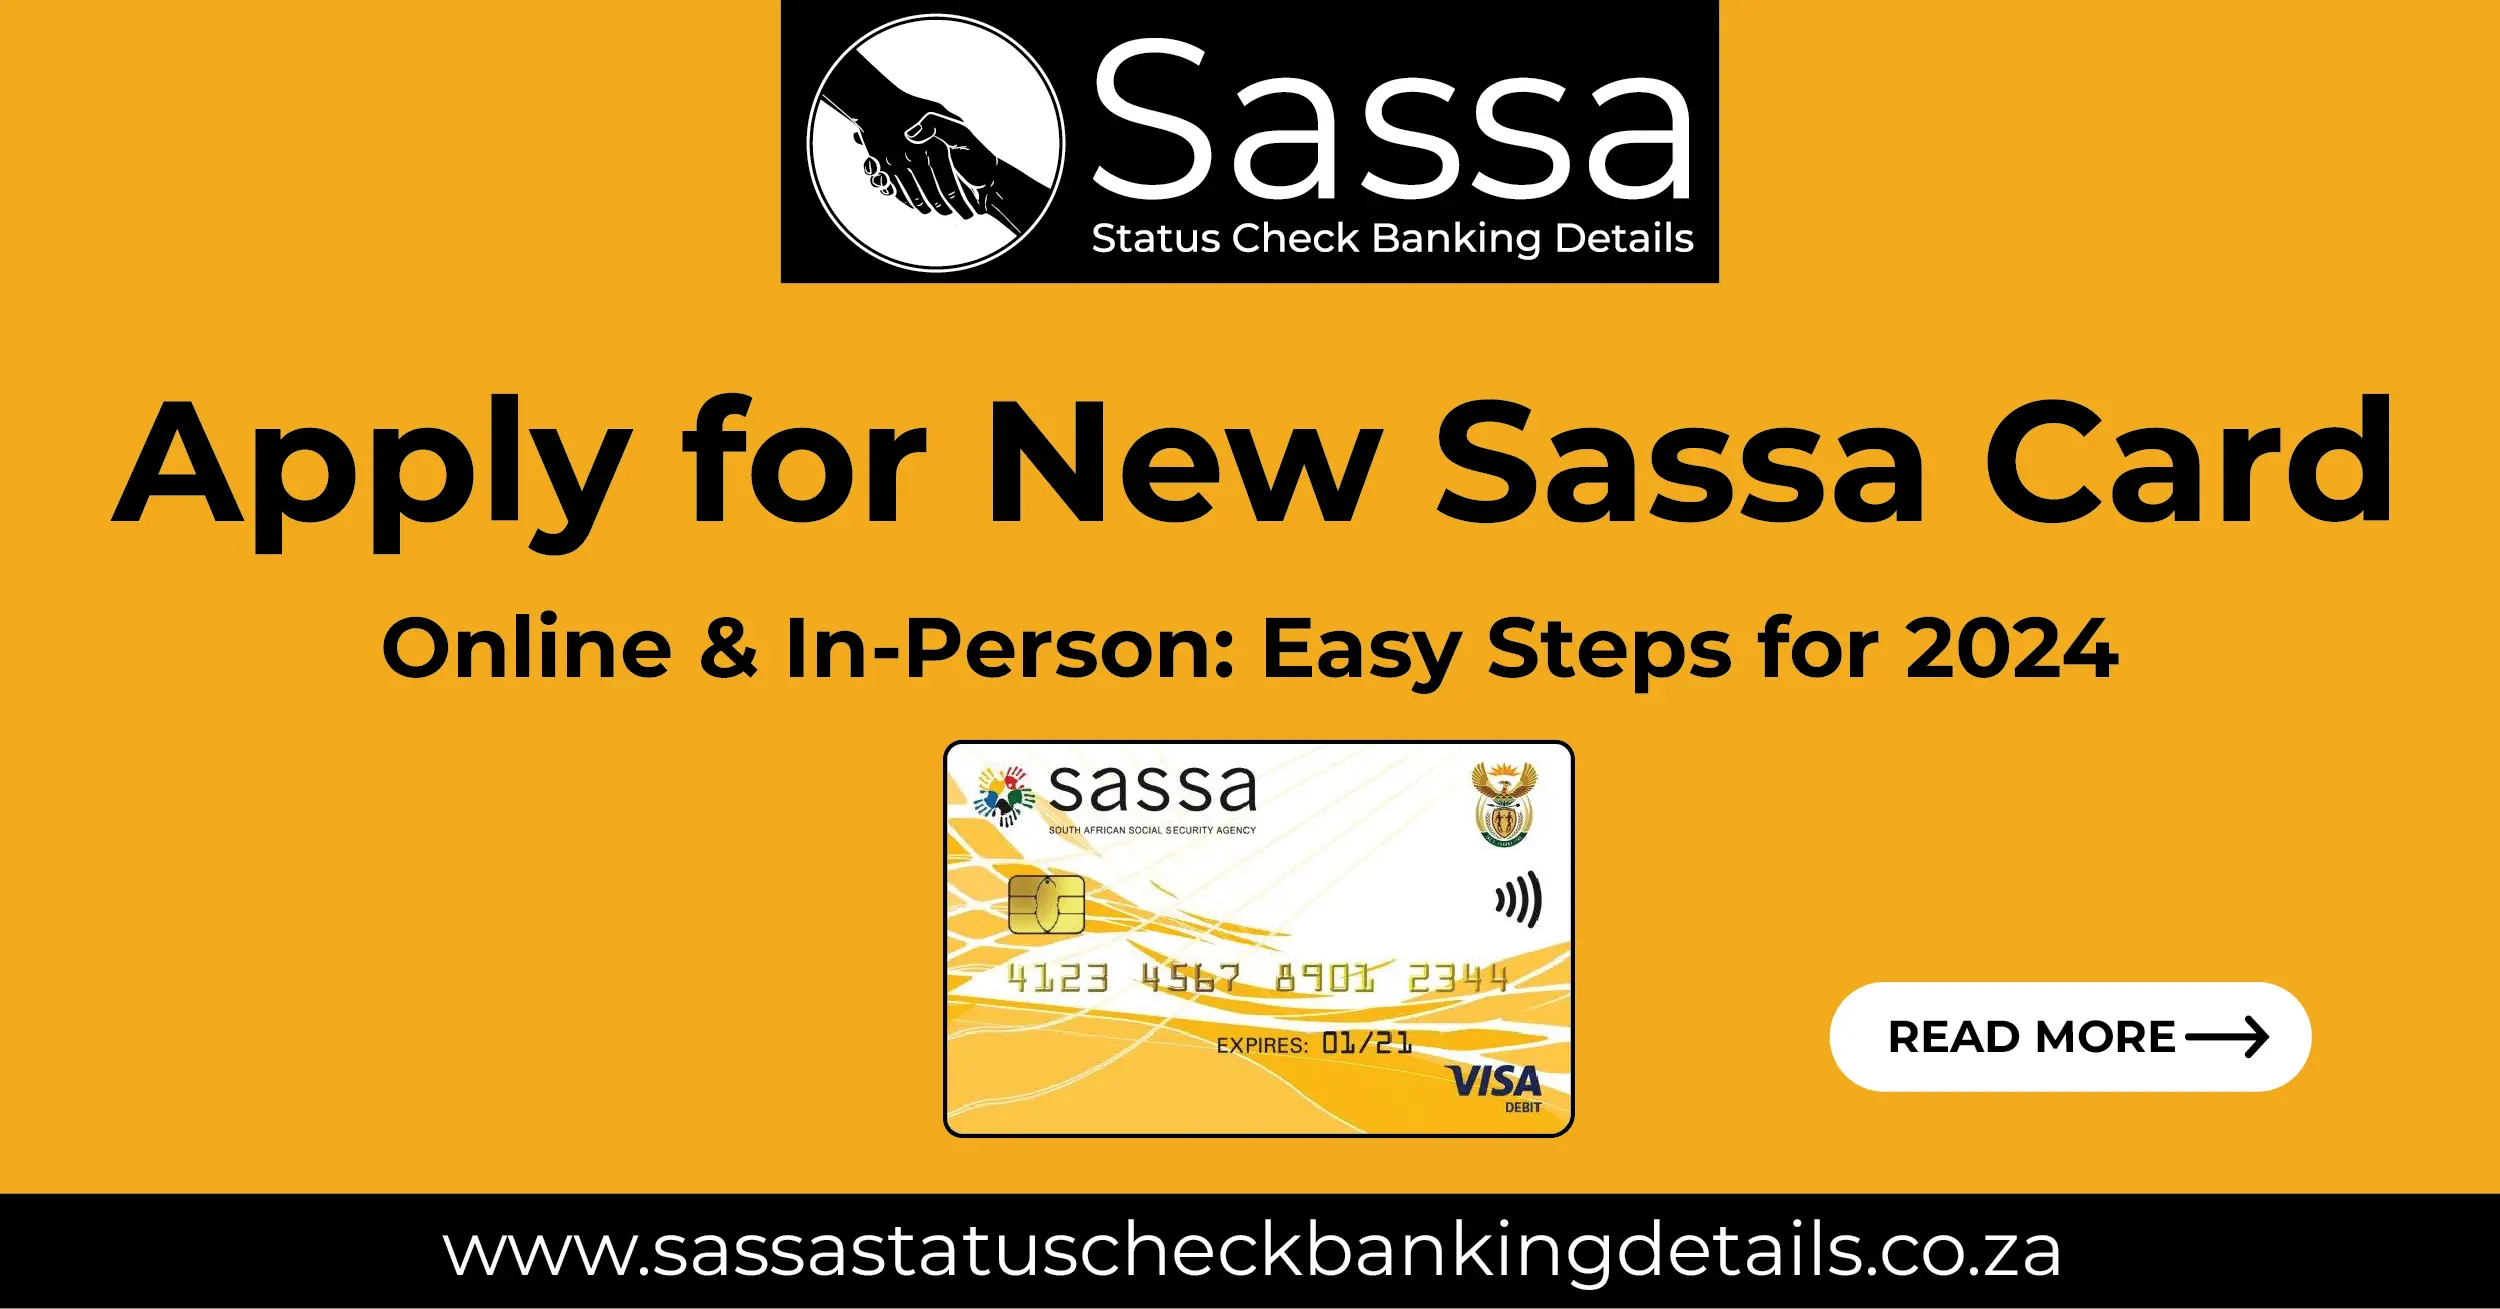 Apply for New Sassa Card Online & In-Person: Easy Steps for 2024